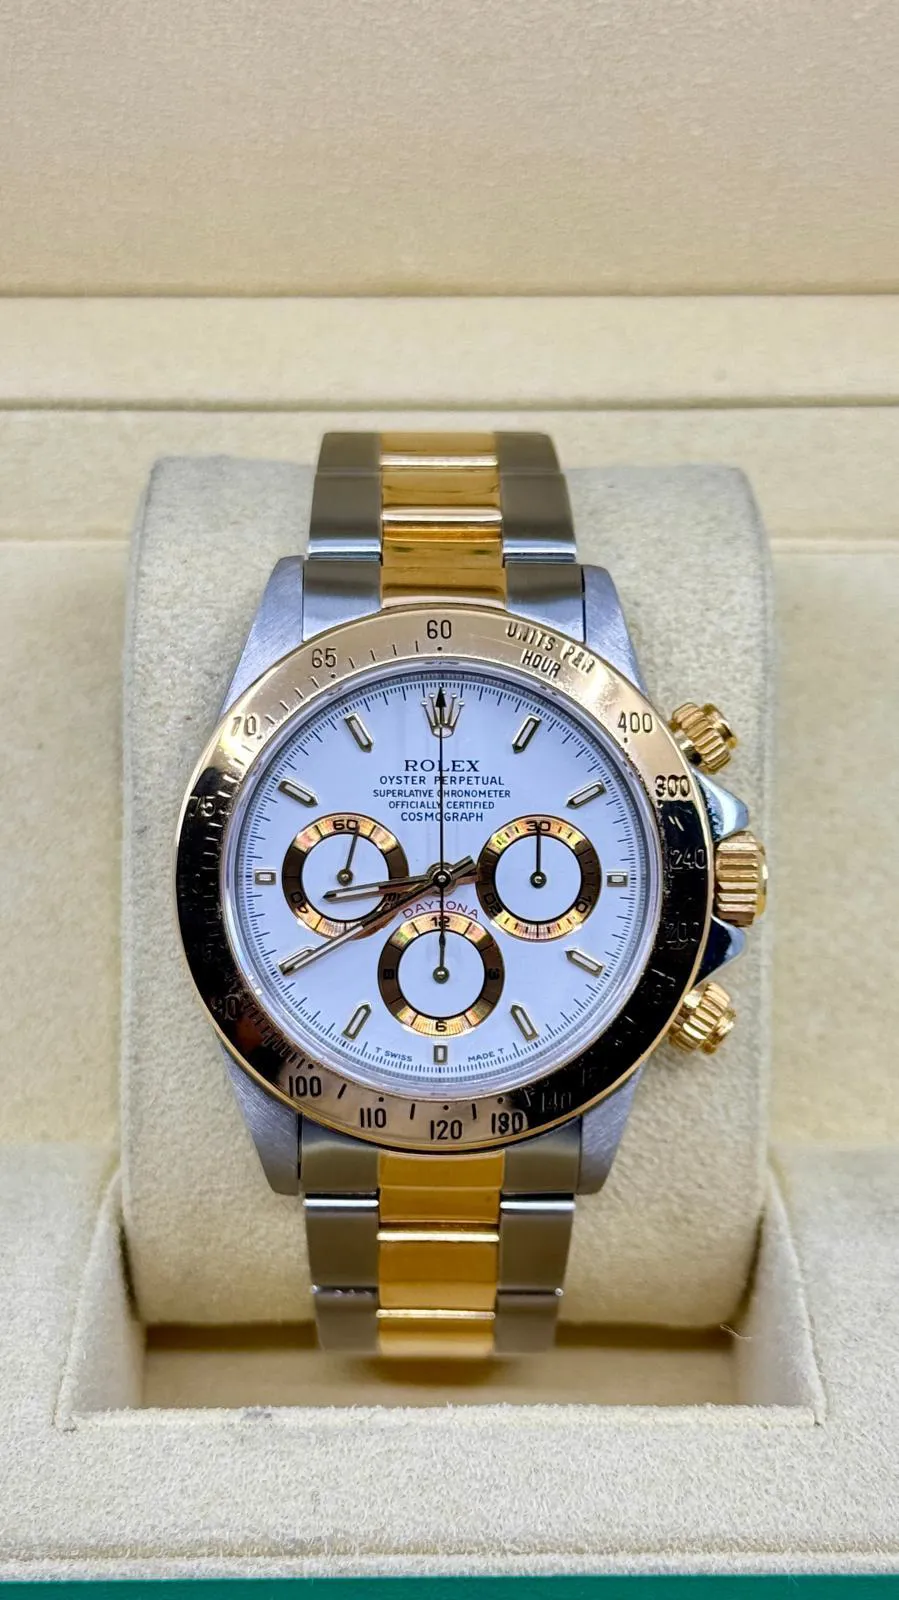 Rolex Daytona 16523 40mm Yellow gold and stainless steel